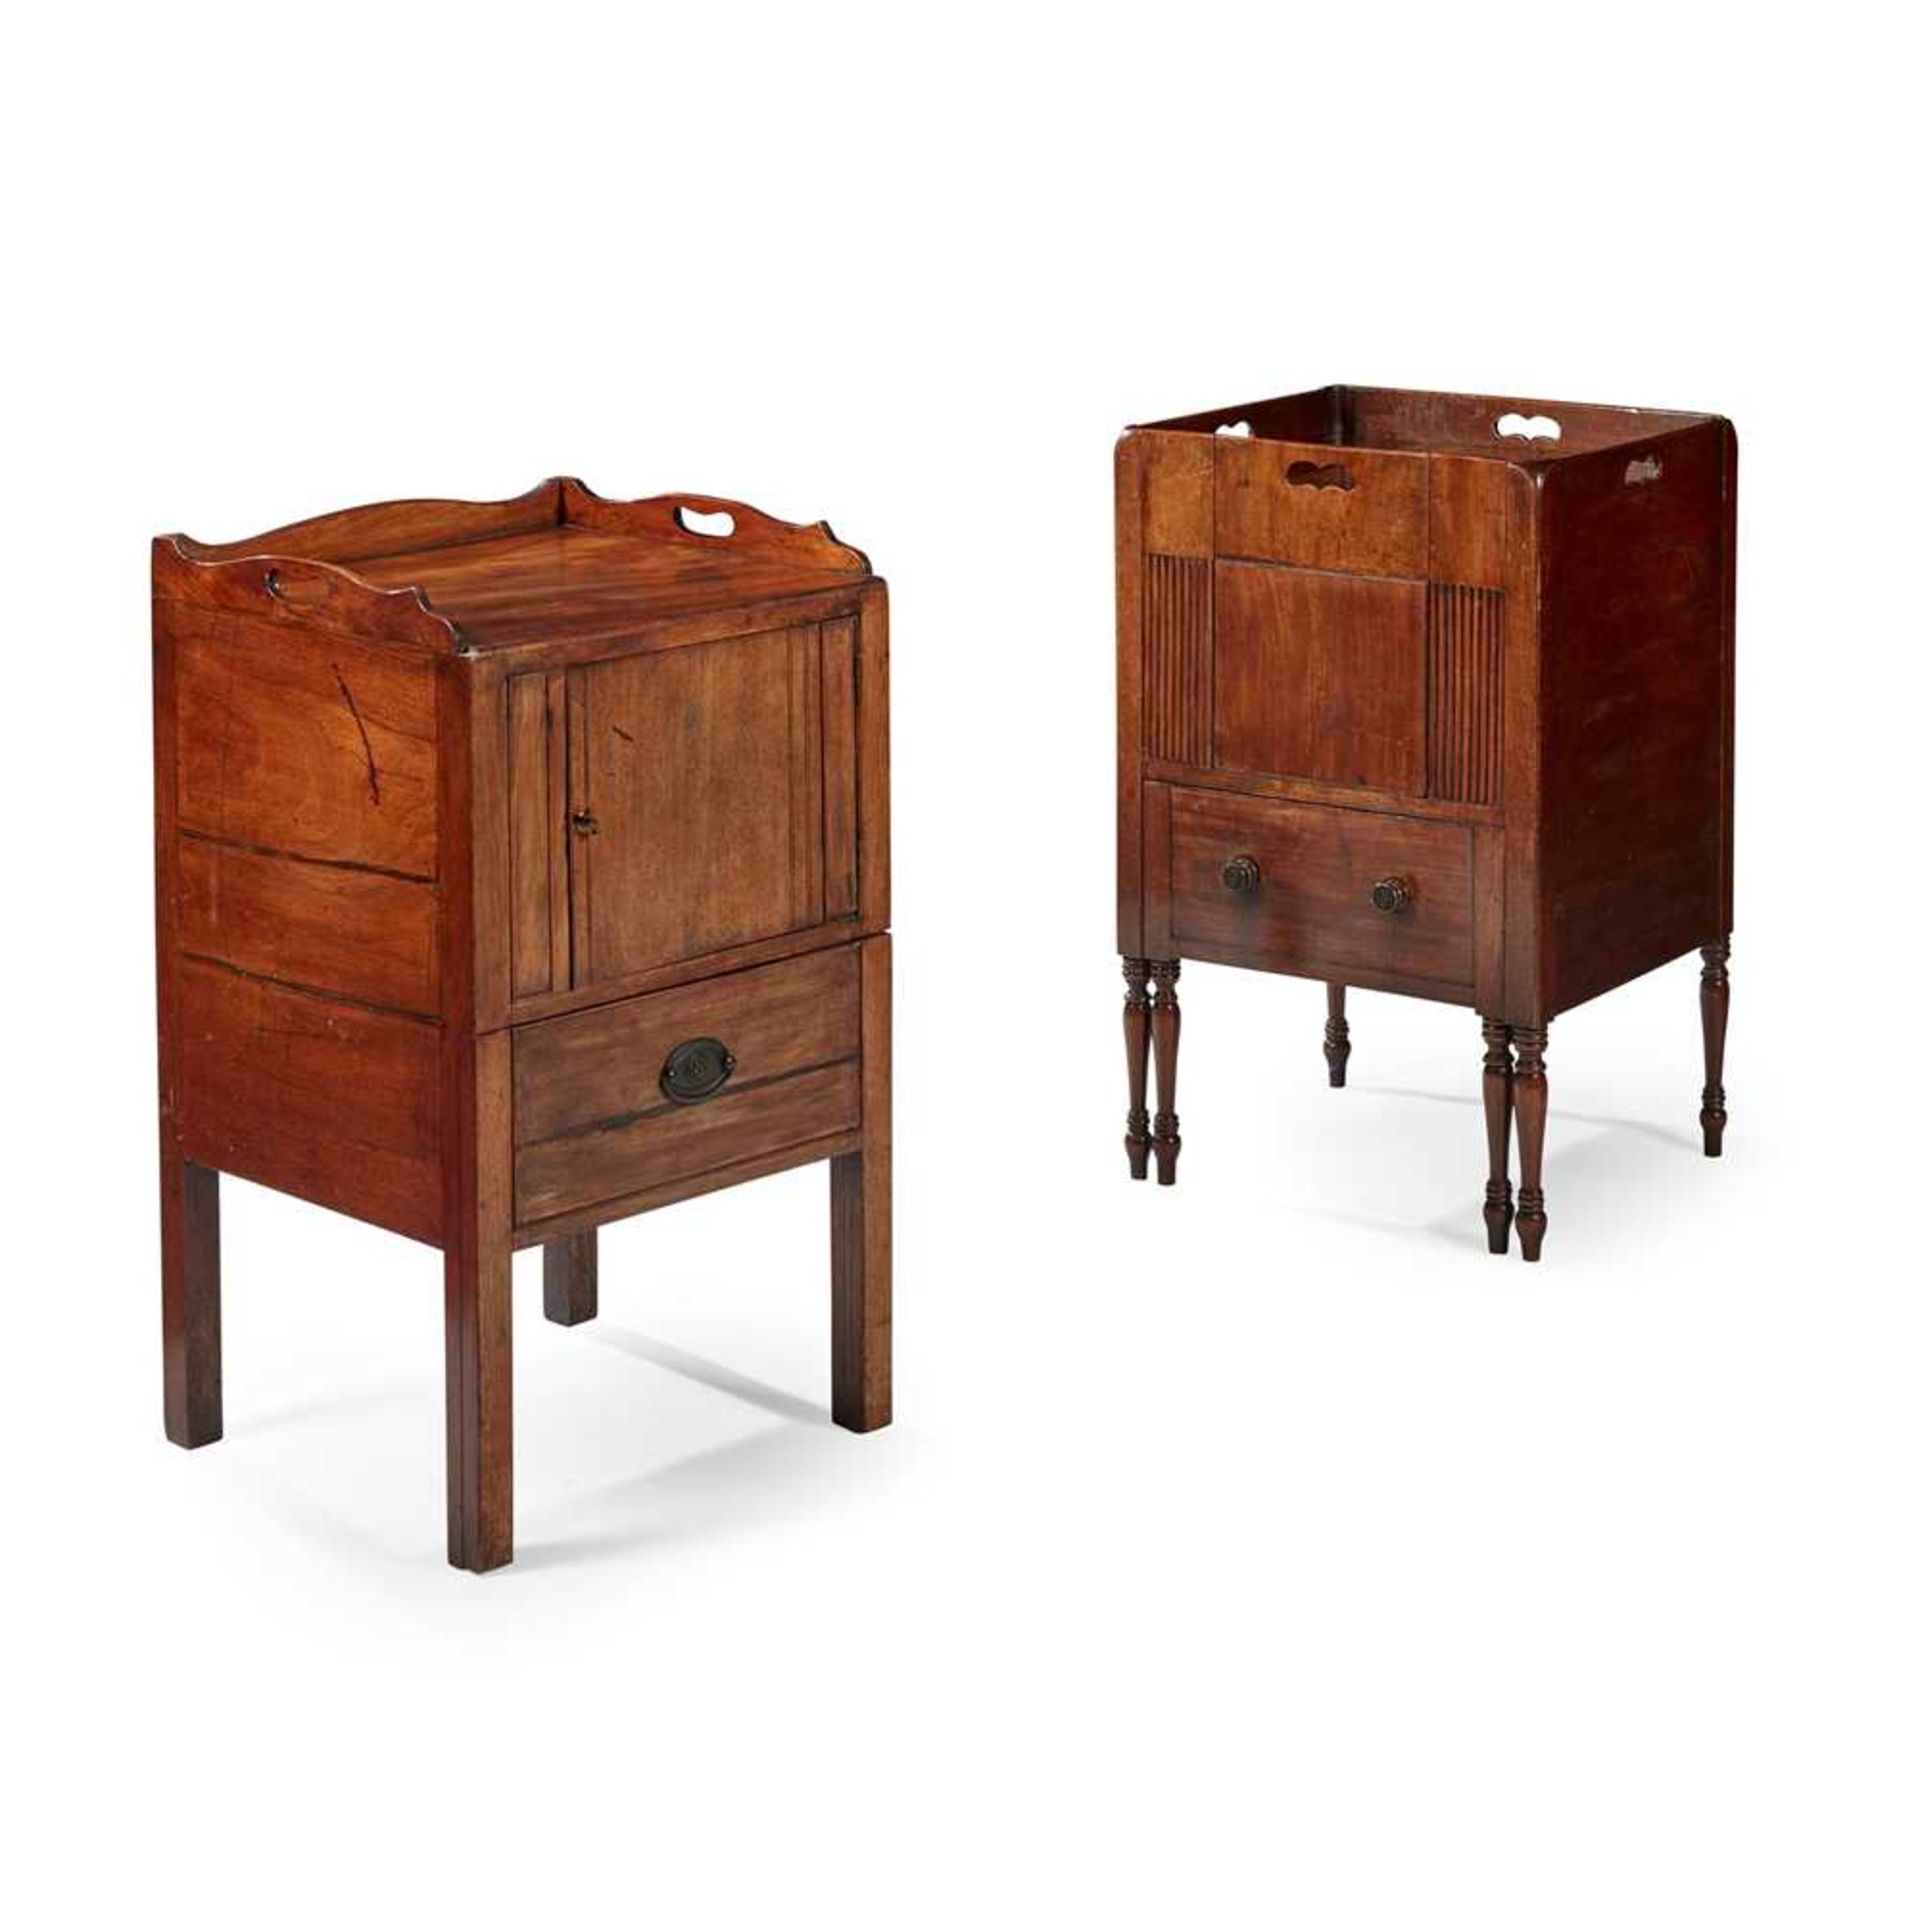 TWO LATE GEORGE III MAHOGANY TRAY-TOP BEDSIDE COMMODES